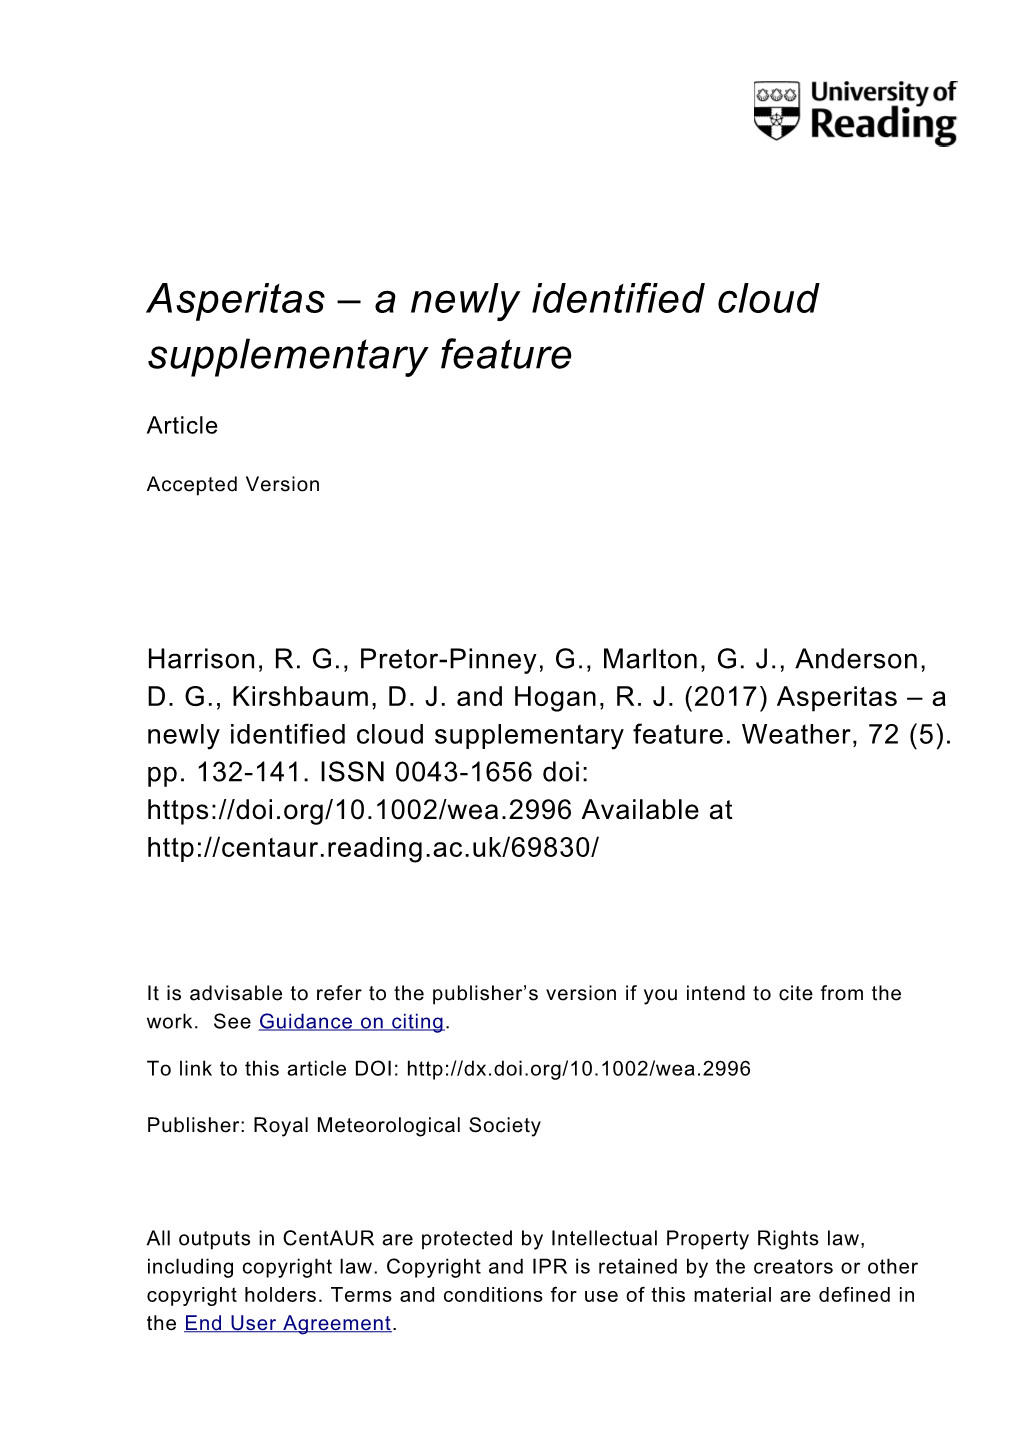 Asperitas – a Newly Identified Cloud Supplementary Feature